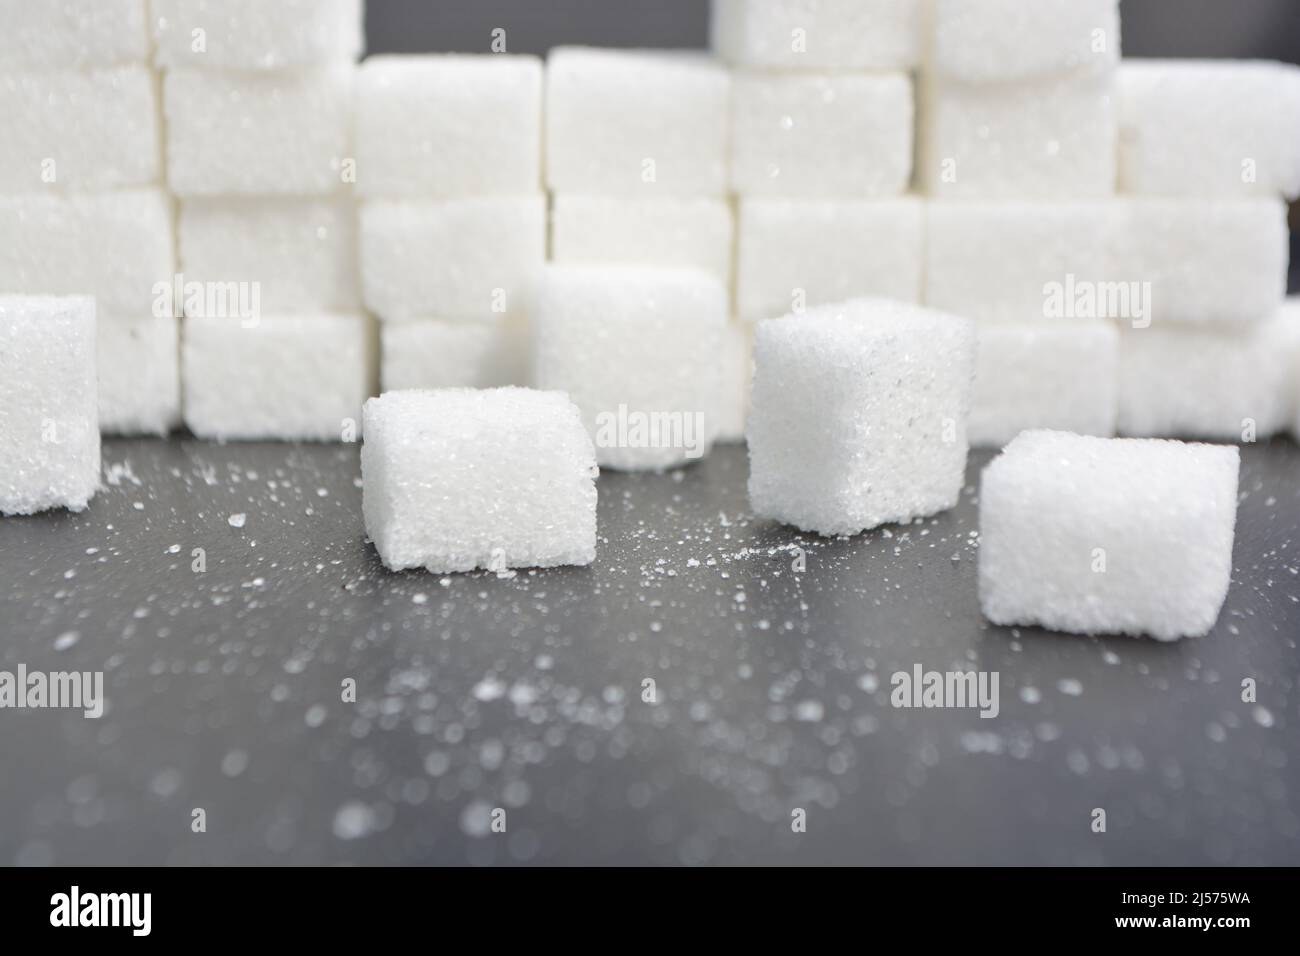 Steps made from sugar cubes. Pile of sugar cubes on a grey shiny ...